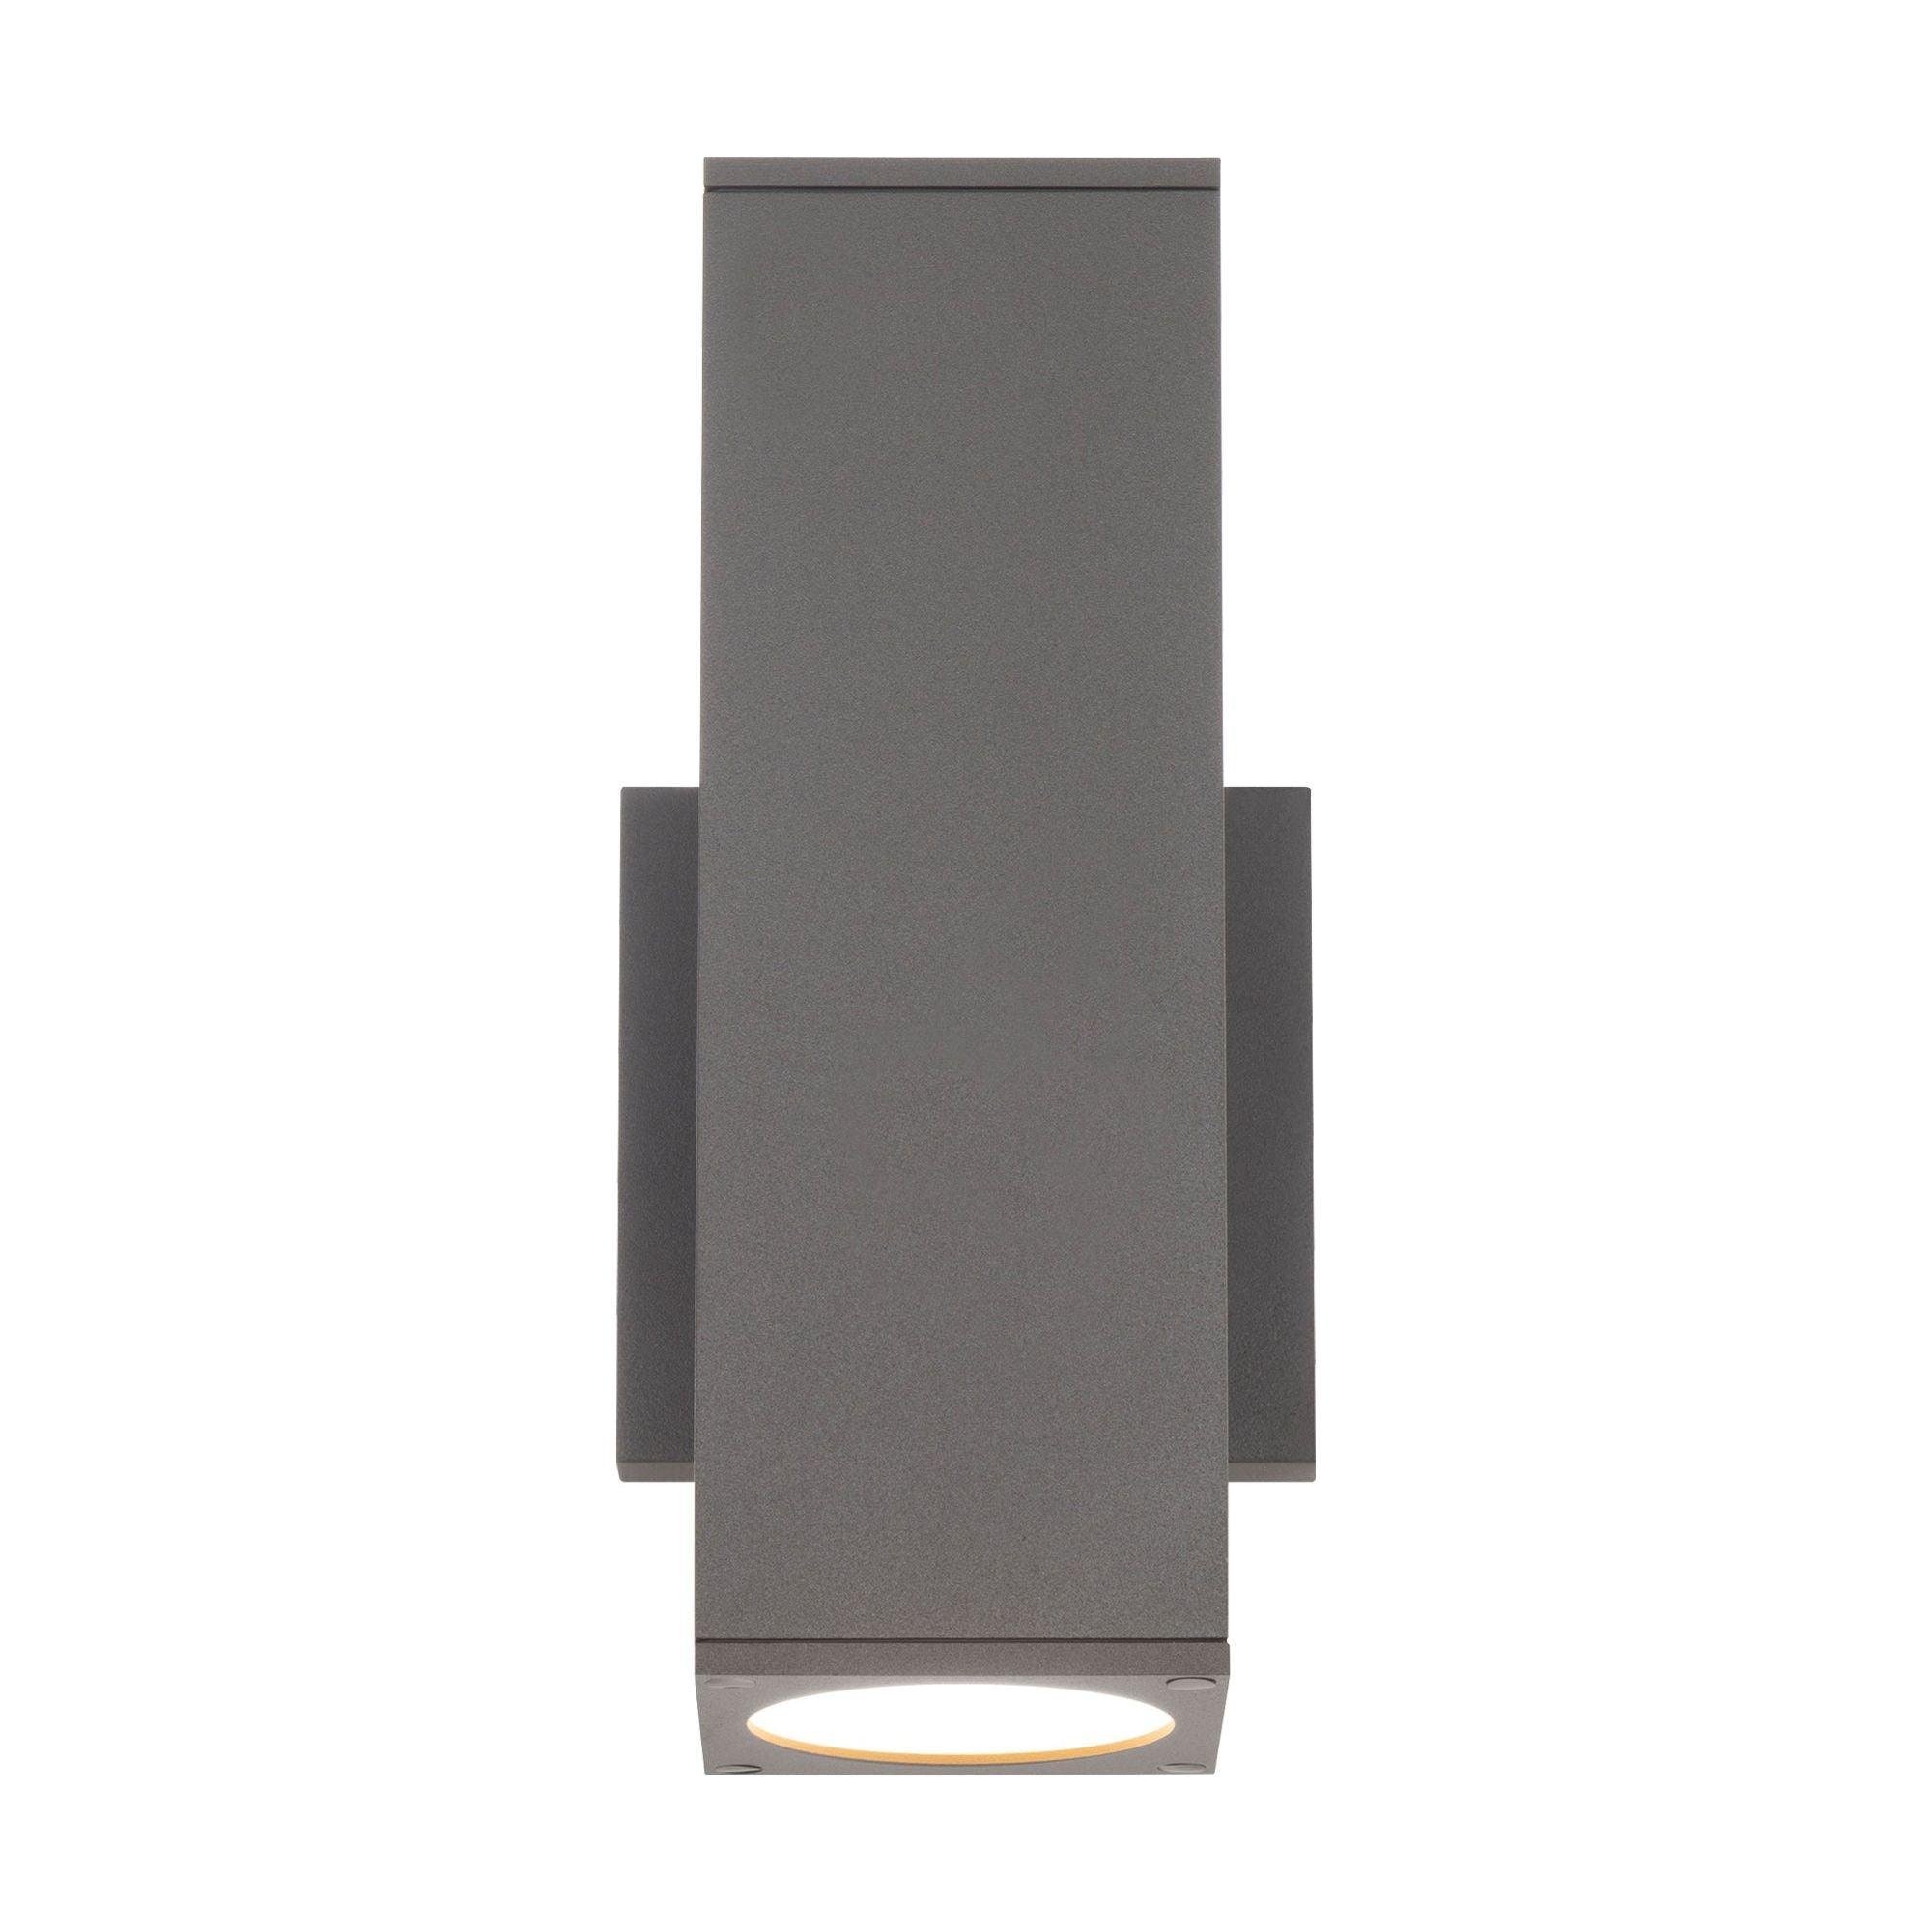 WAC Lighting - Cubix LED Double Up and Down Indoor/Outdoor Wall Light - Lights Canada